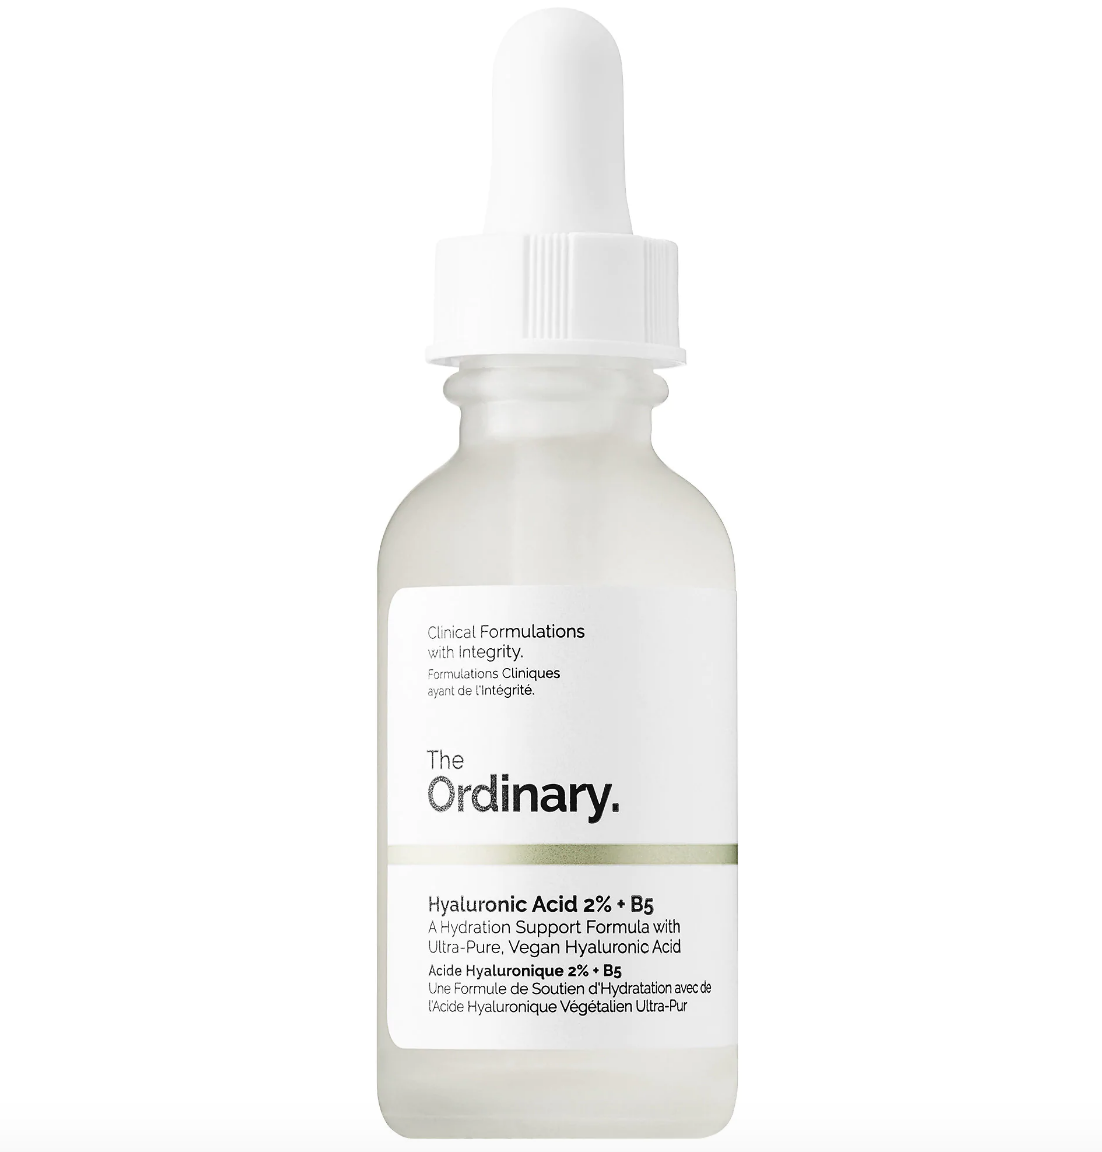 Hyaluronic Acid 2% + B5 by The Ordinary, $6.80